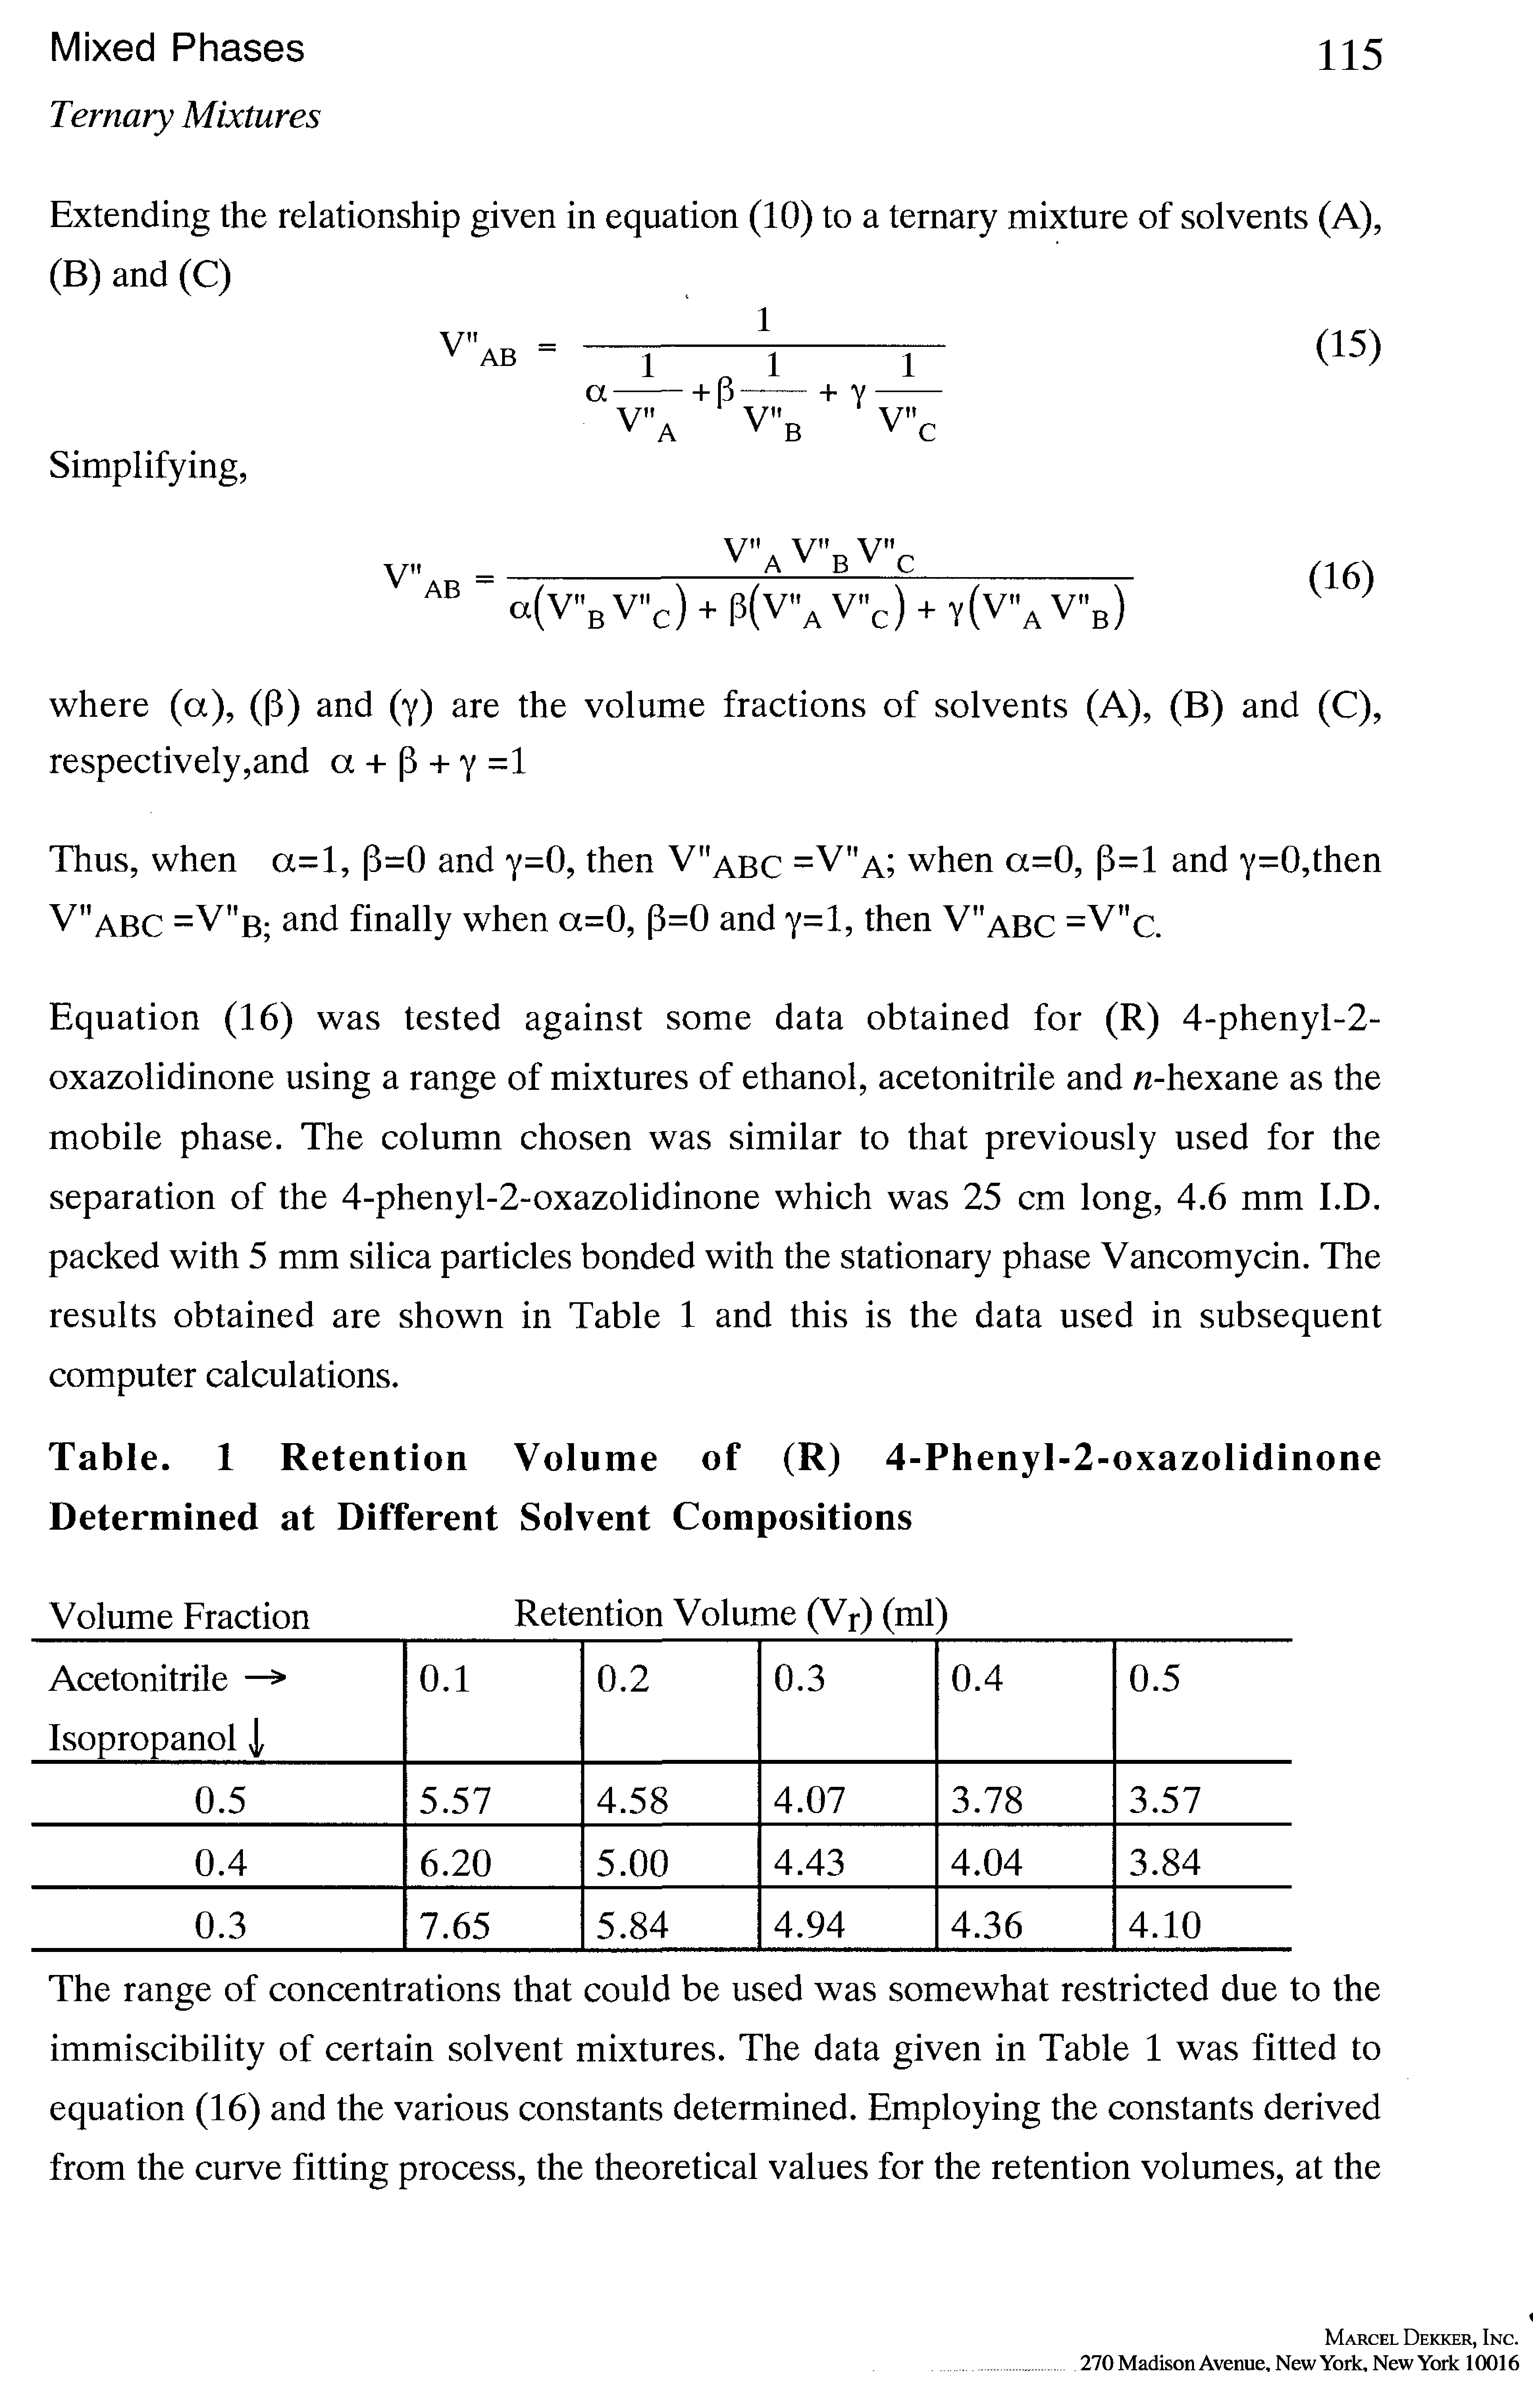 Table. 1 Retention Volume of (R) 4-Phenyl-2-oxazolidinone Determined at Different Solvent Compositions...